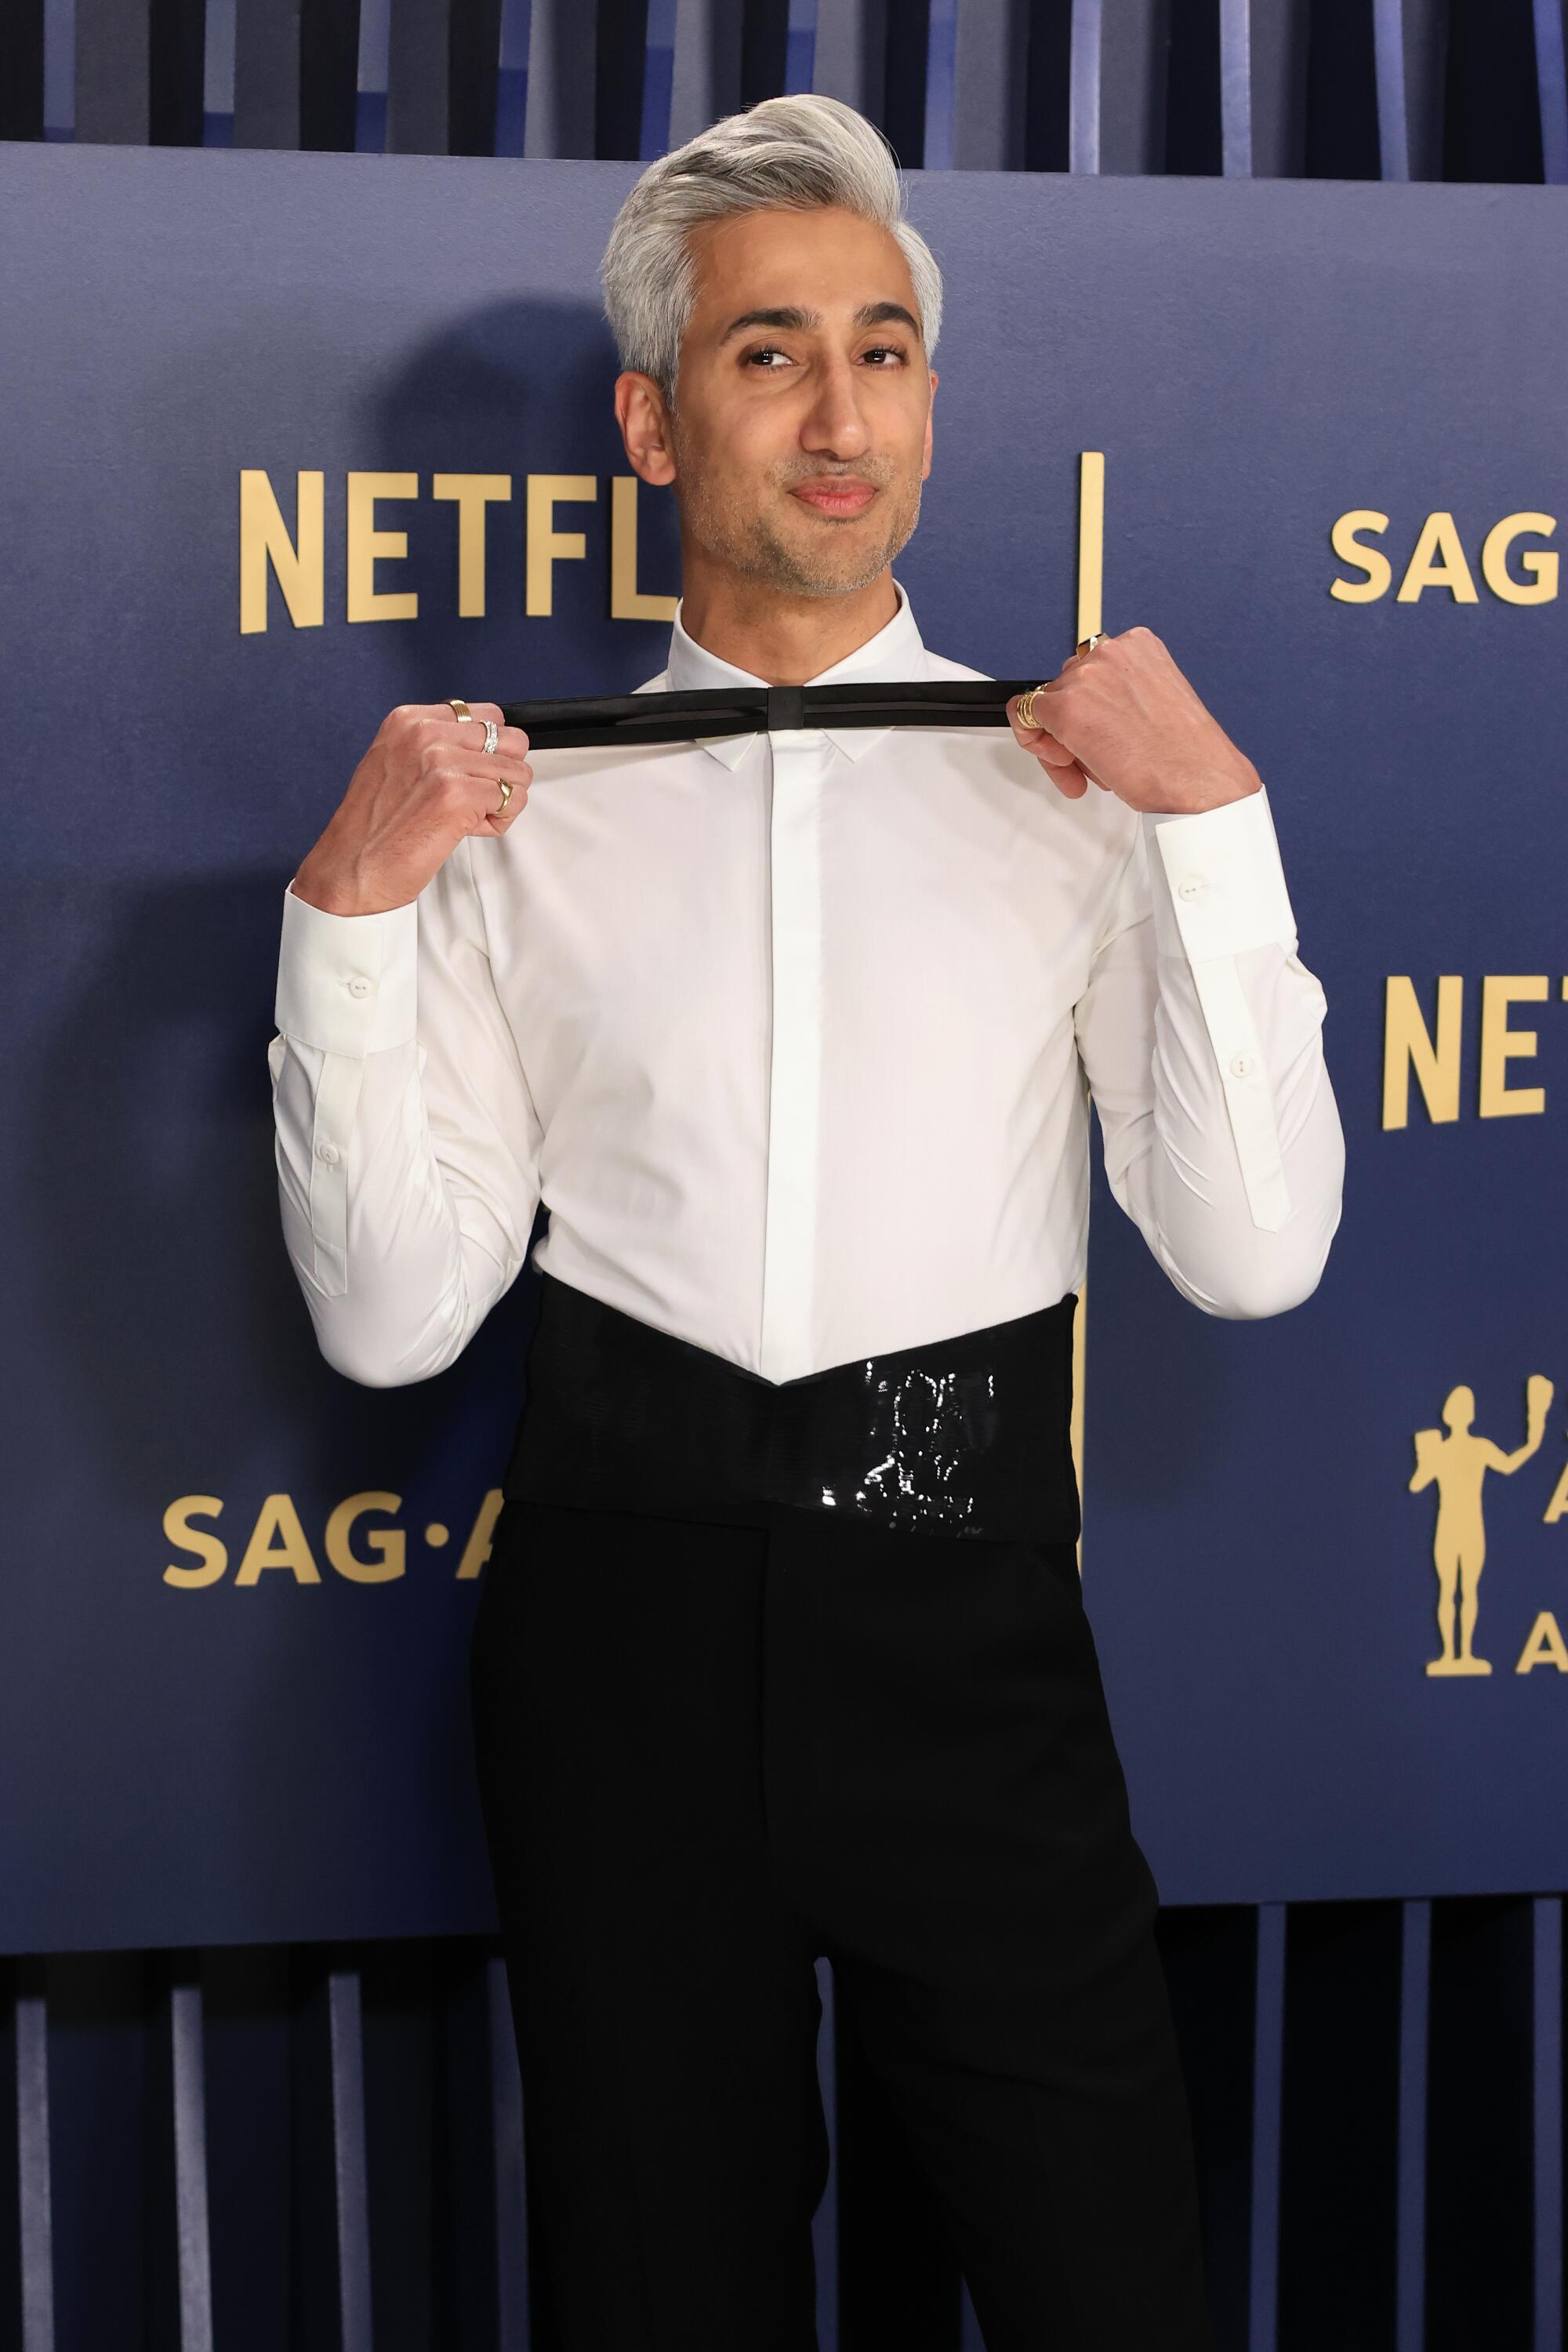 Tan France shows off his unorthodox bow tie at the Screen Actors Guild Awards.